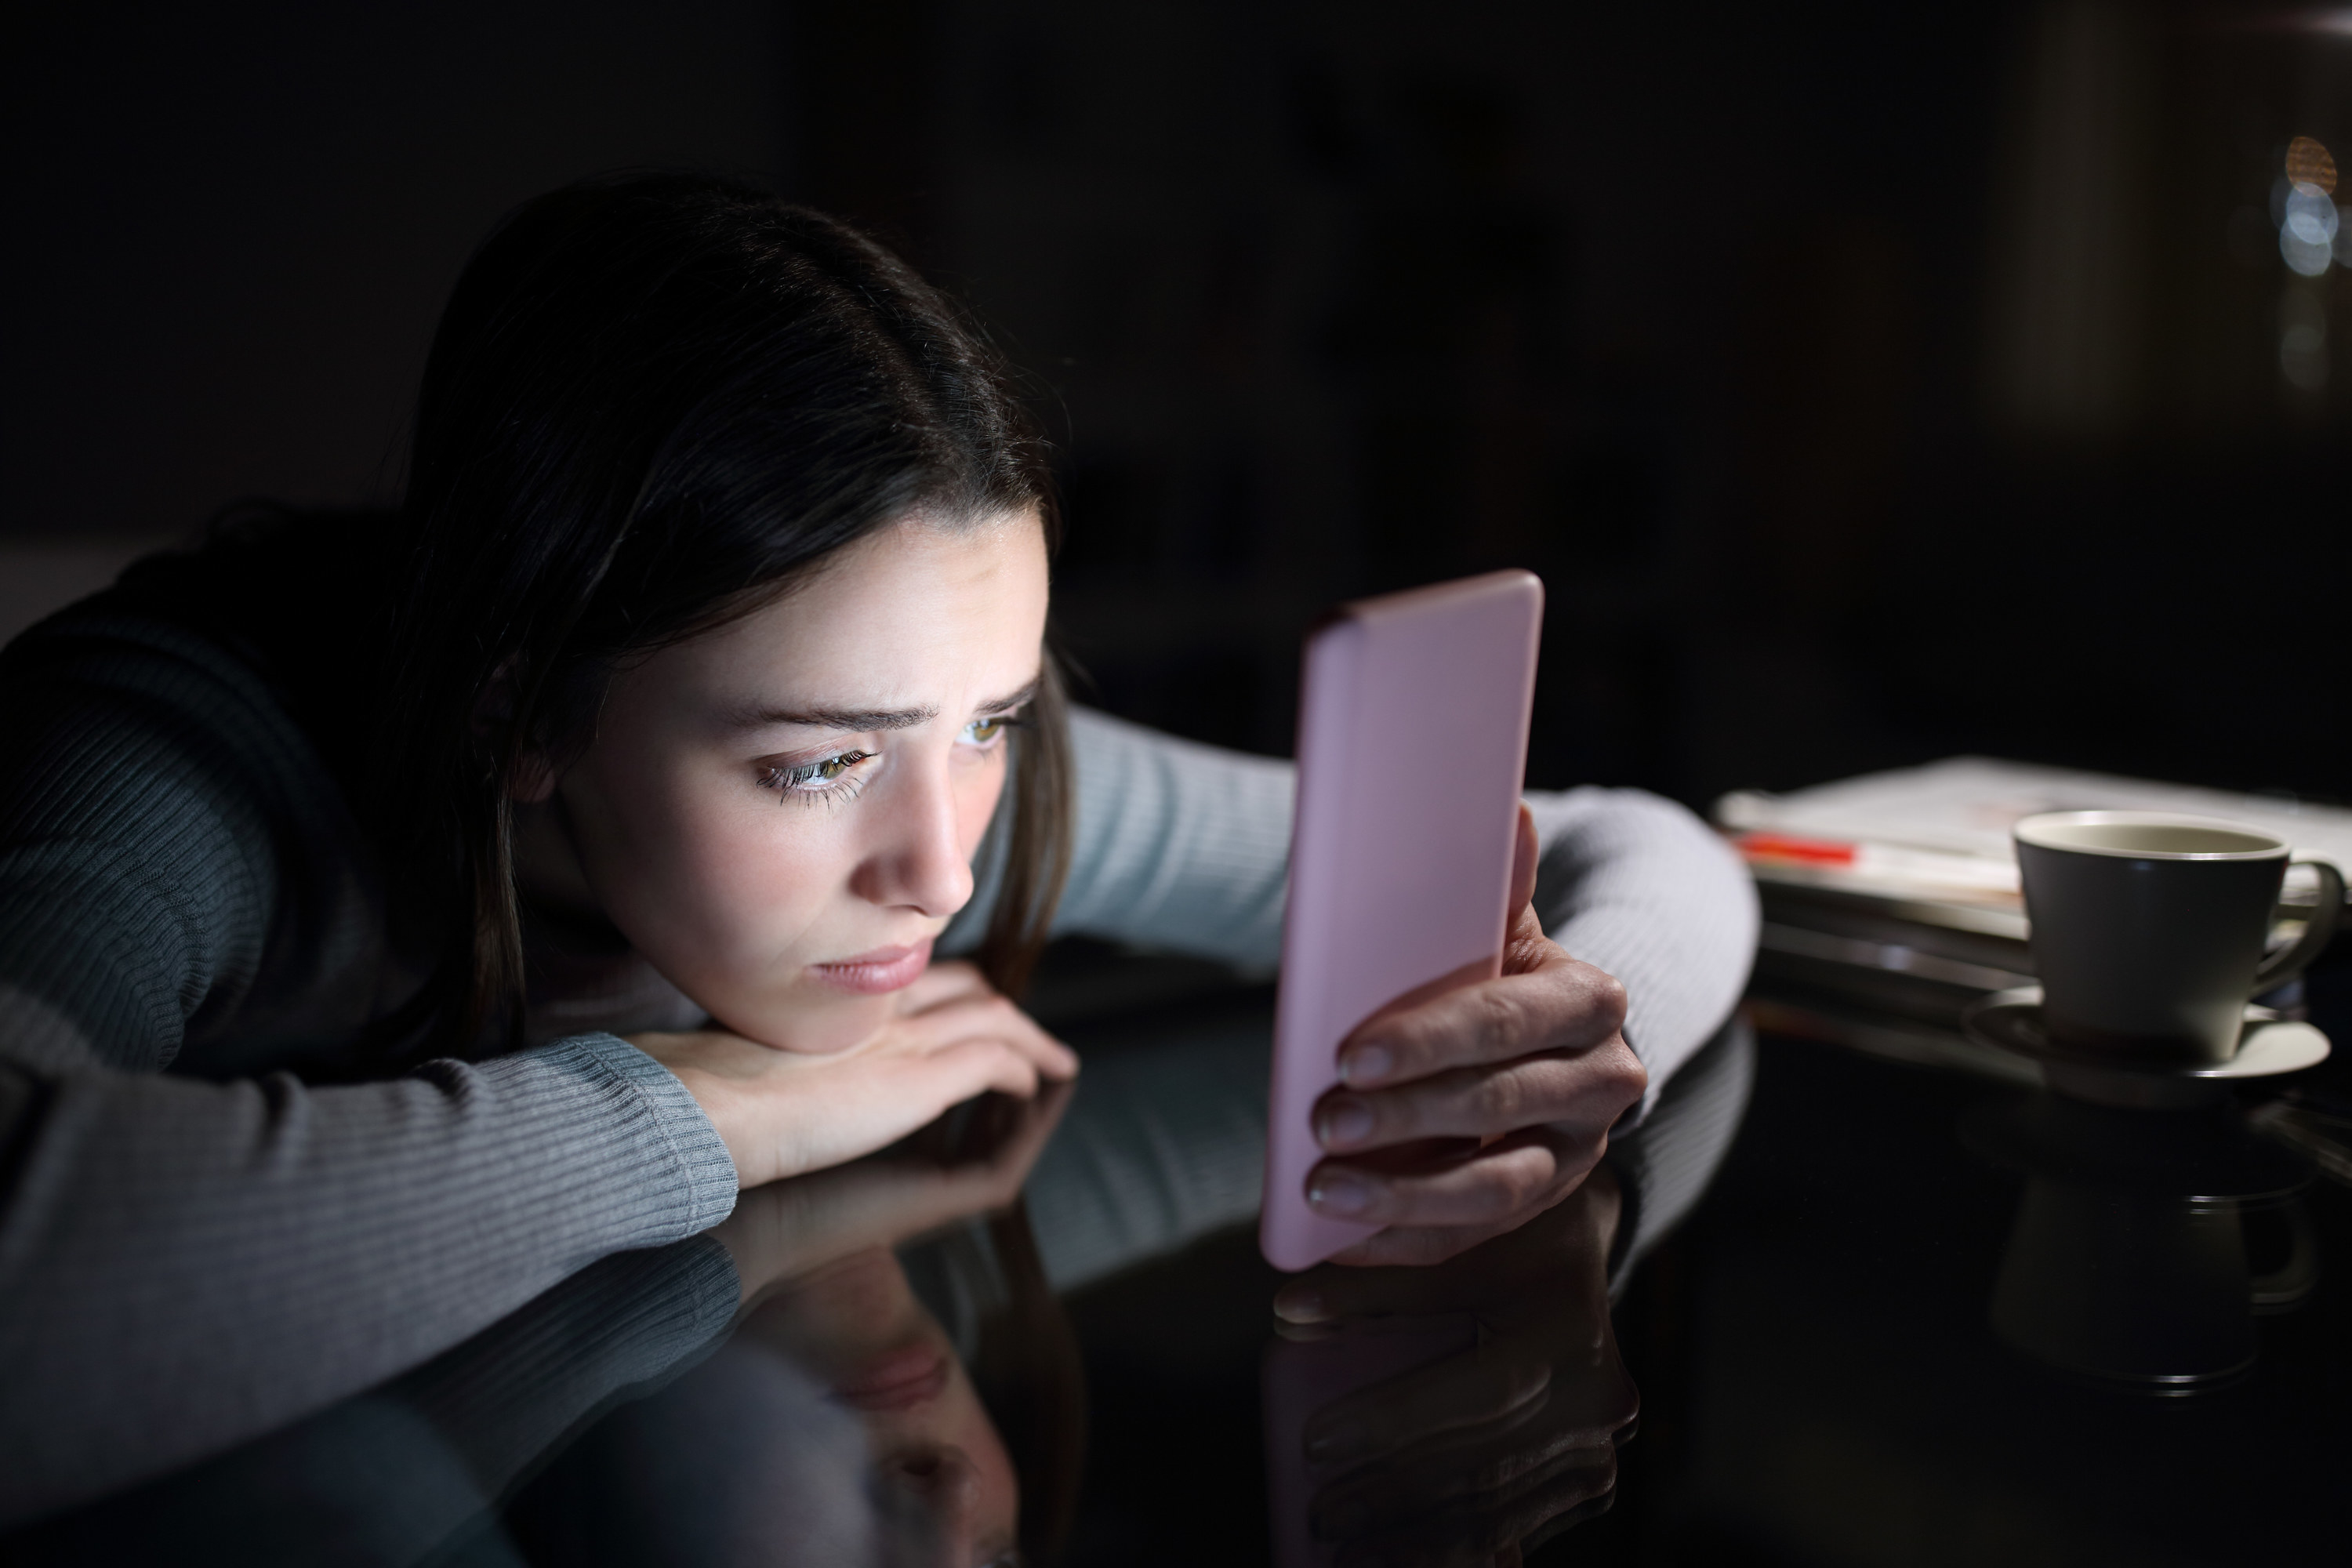 A girl looks sad while staring at her phone in the dark